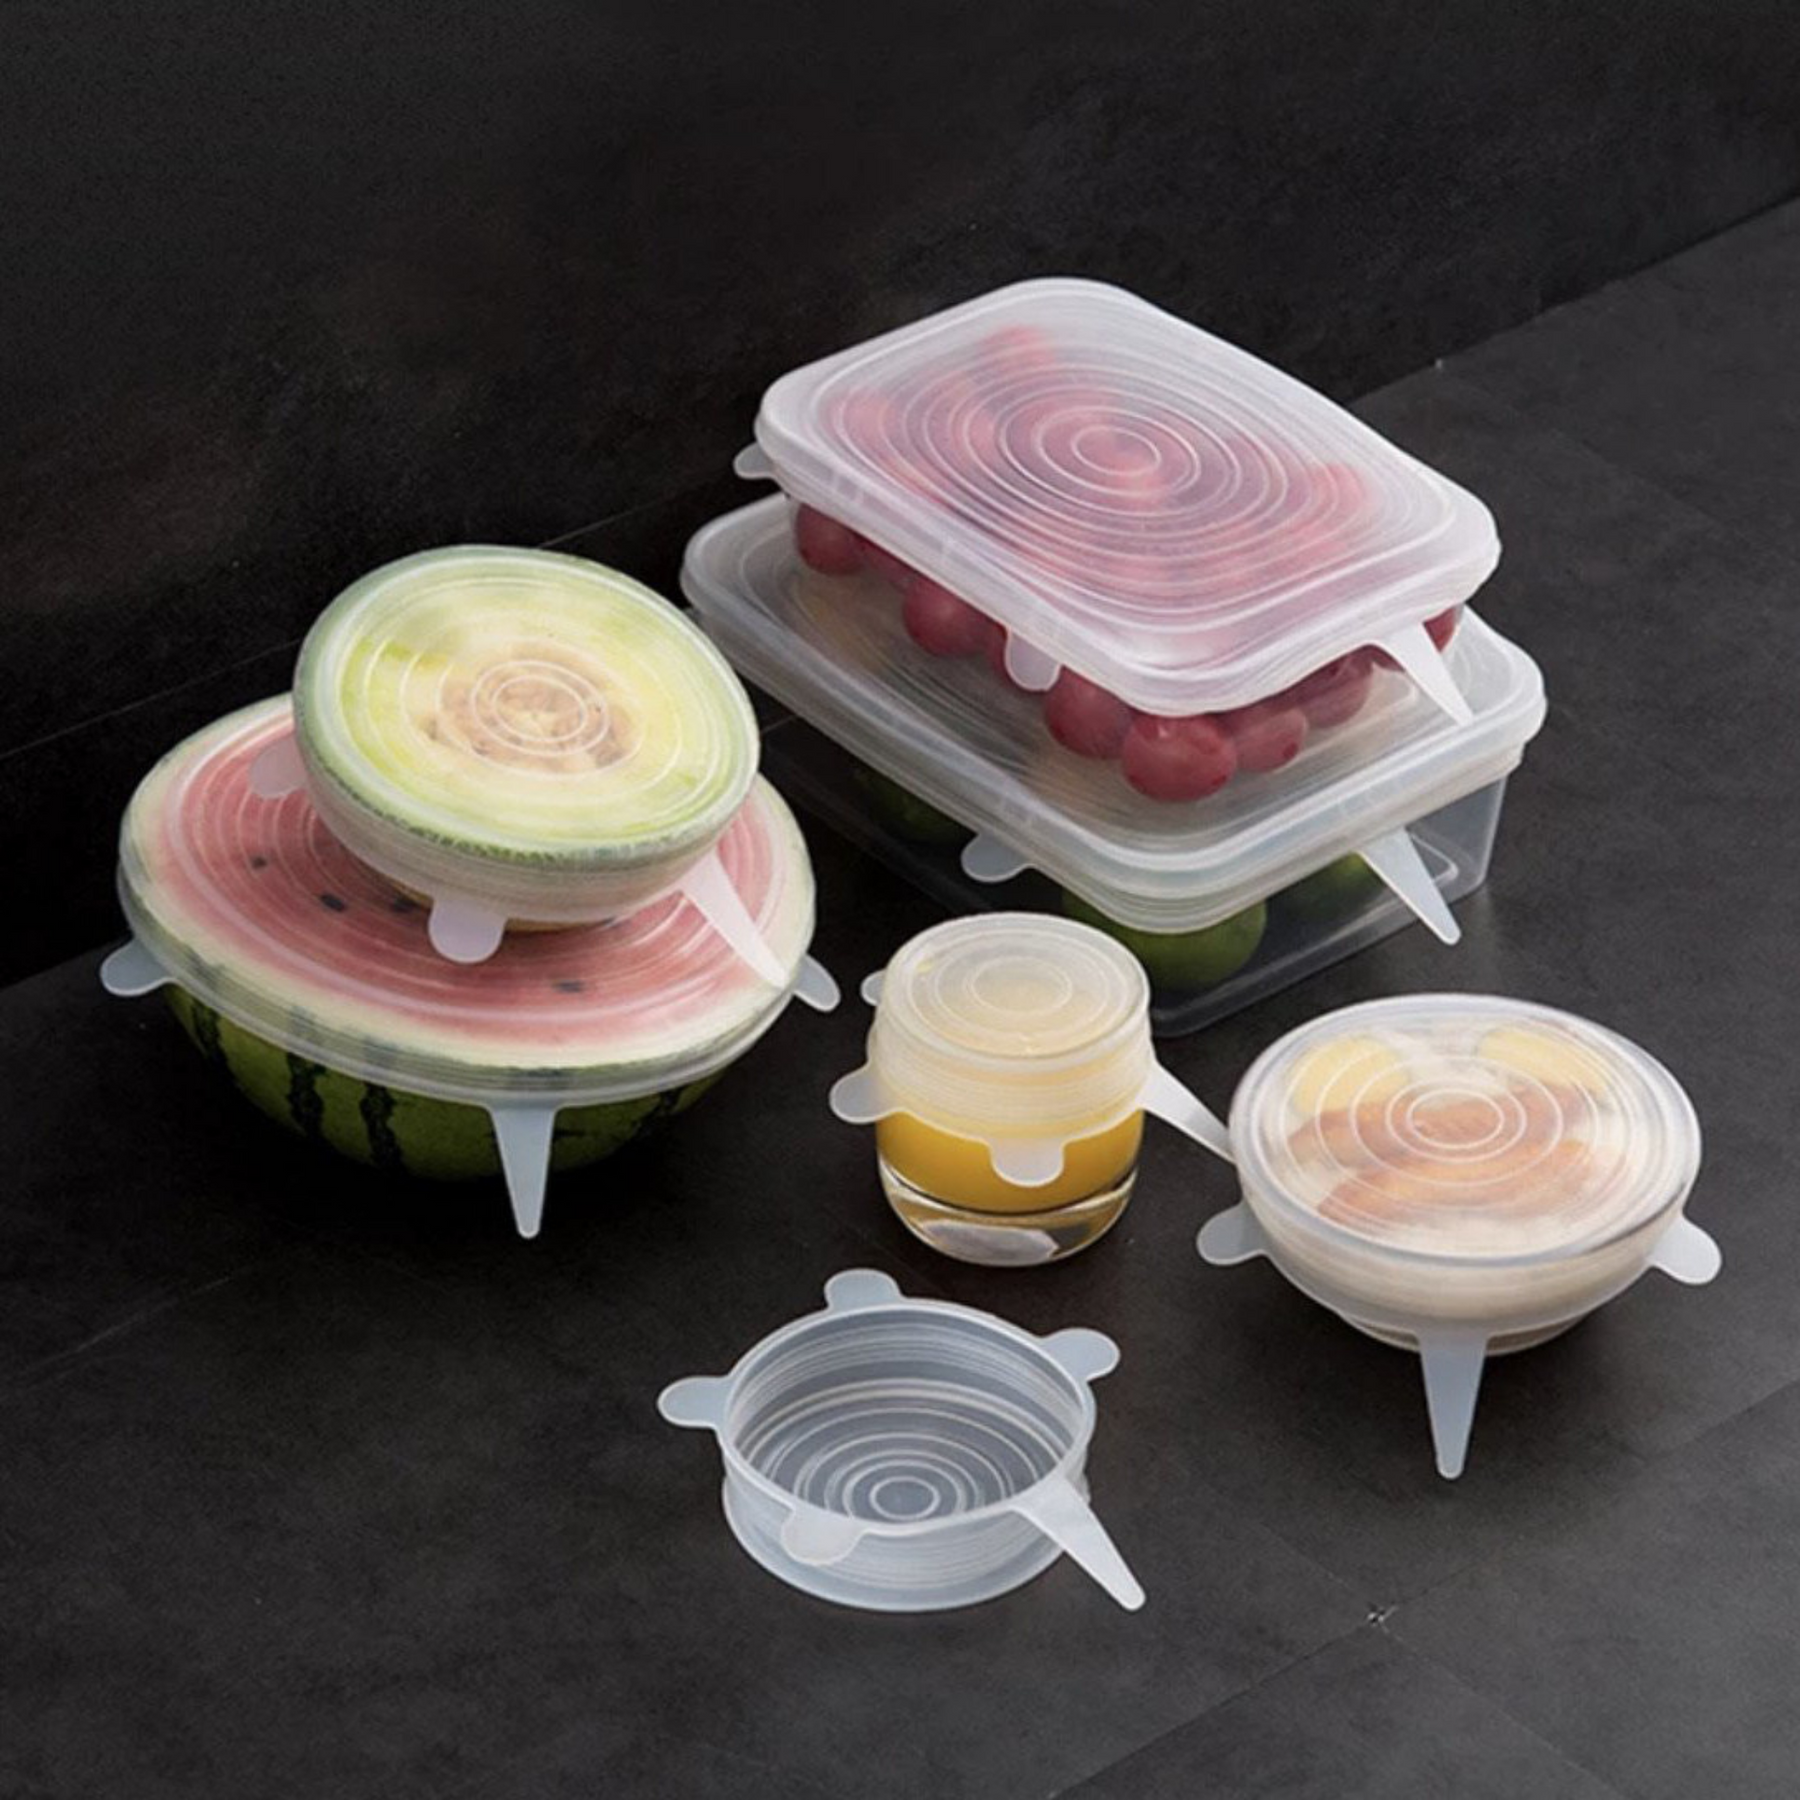  Silicone Bowl Covers - Silicone Covers for Food